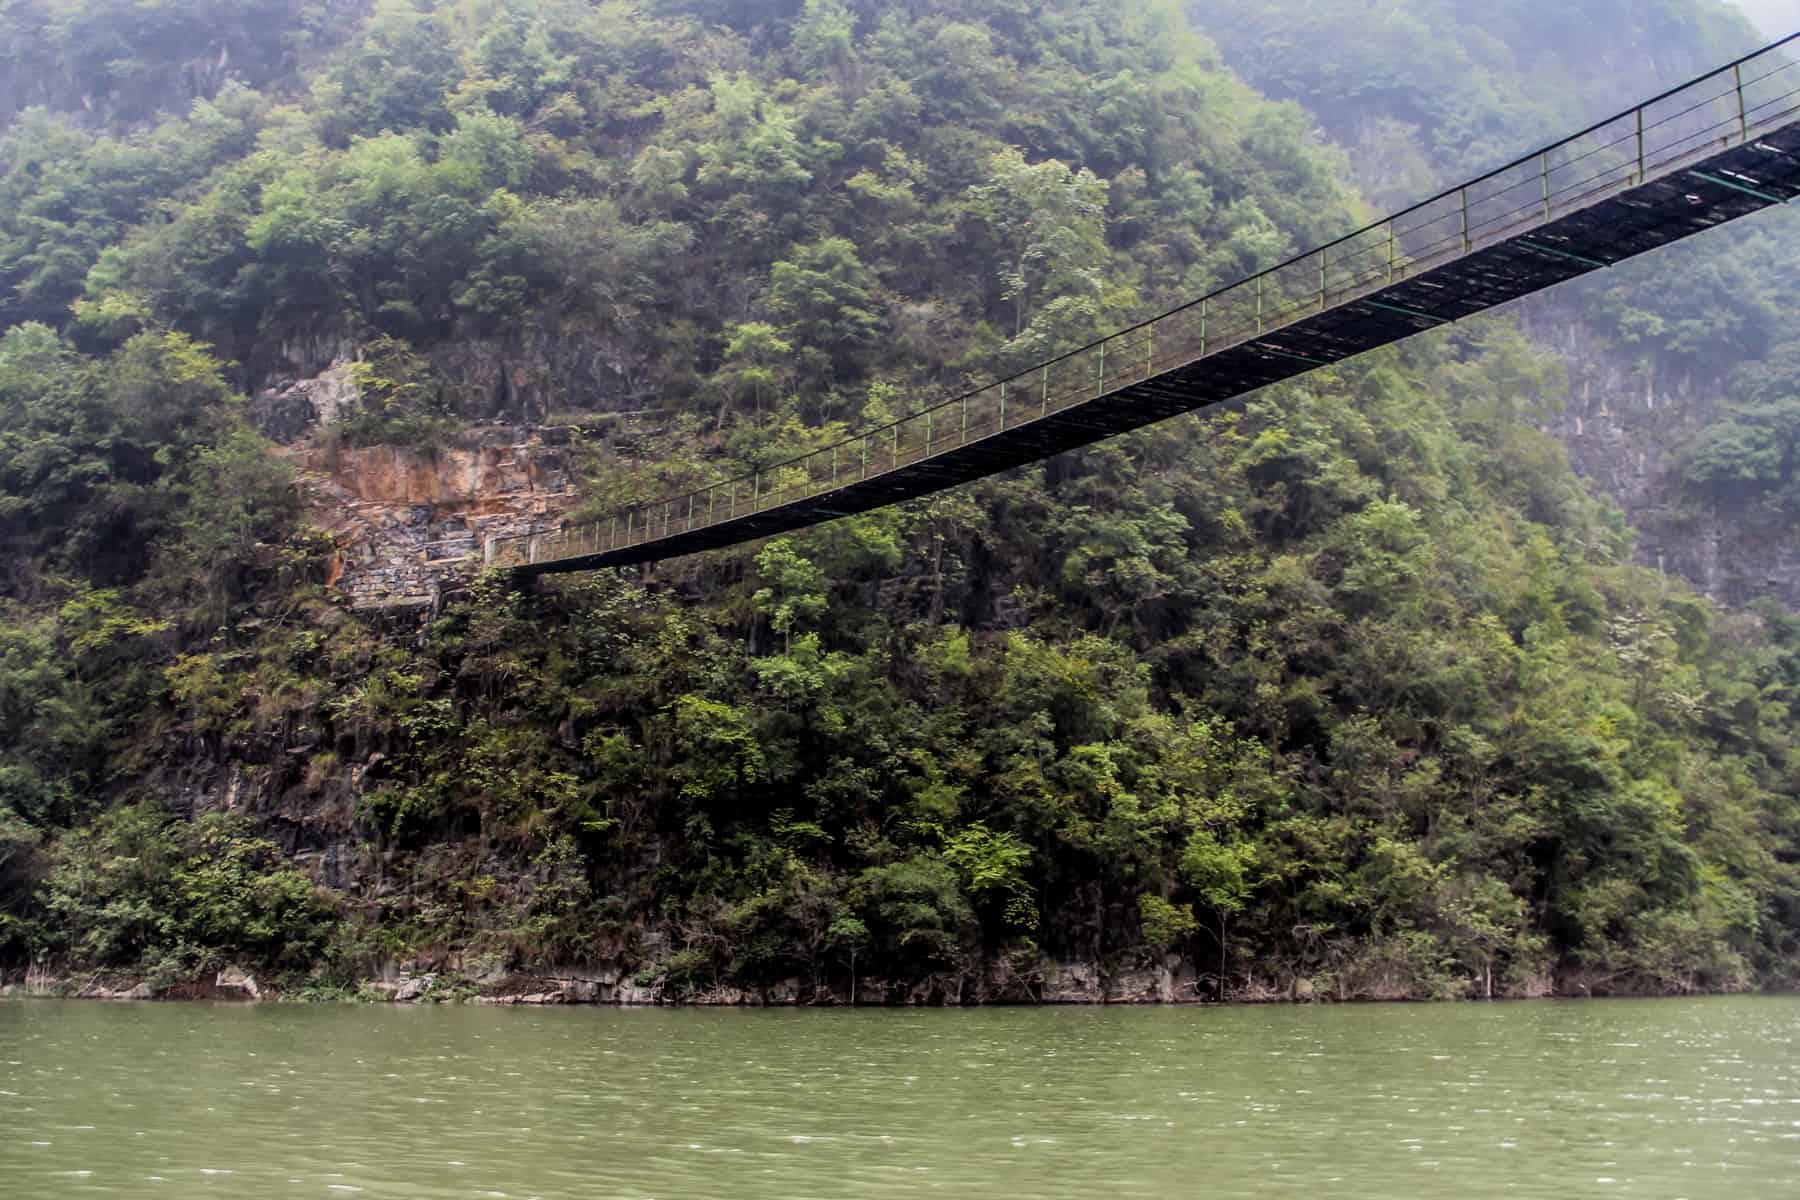 A long bridges connects two sides of the lush, green Gorges on the Yangtze River in China